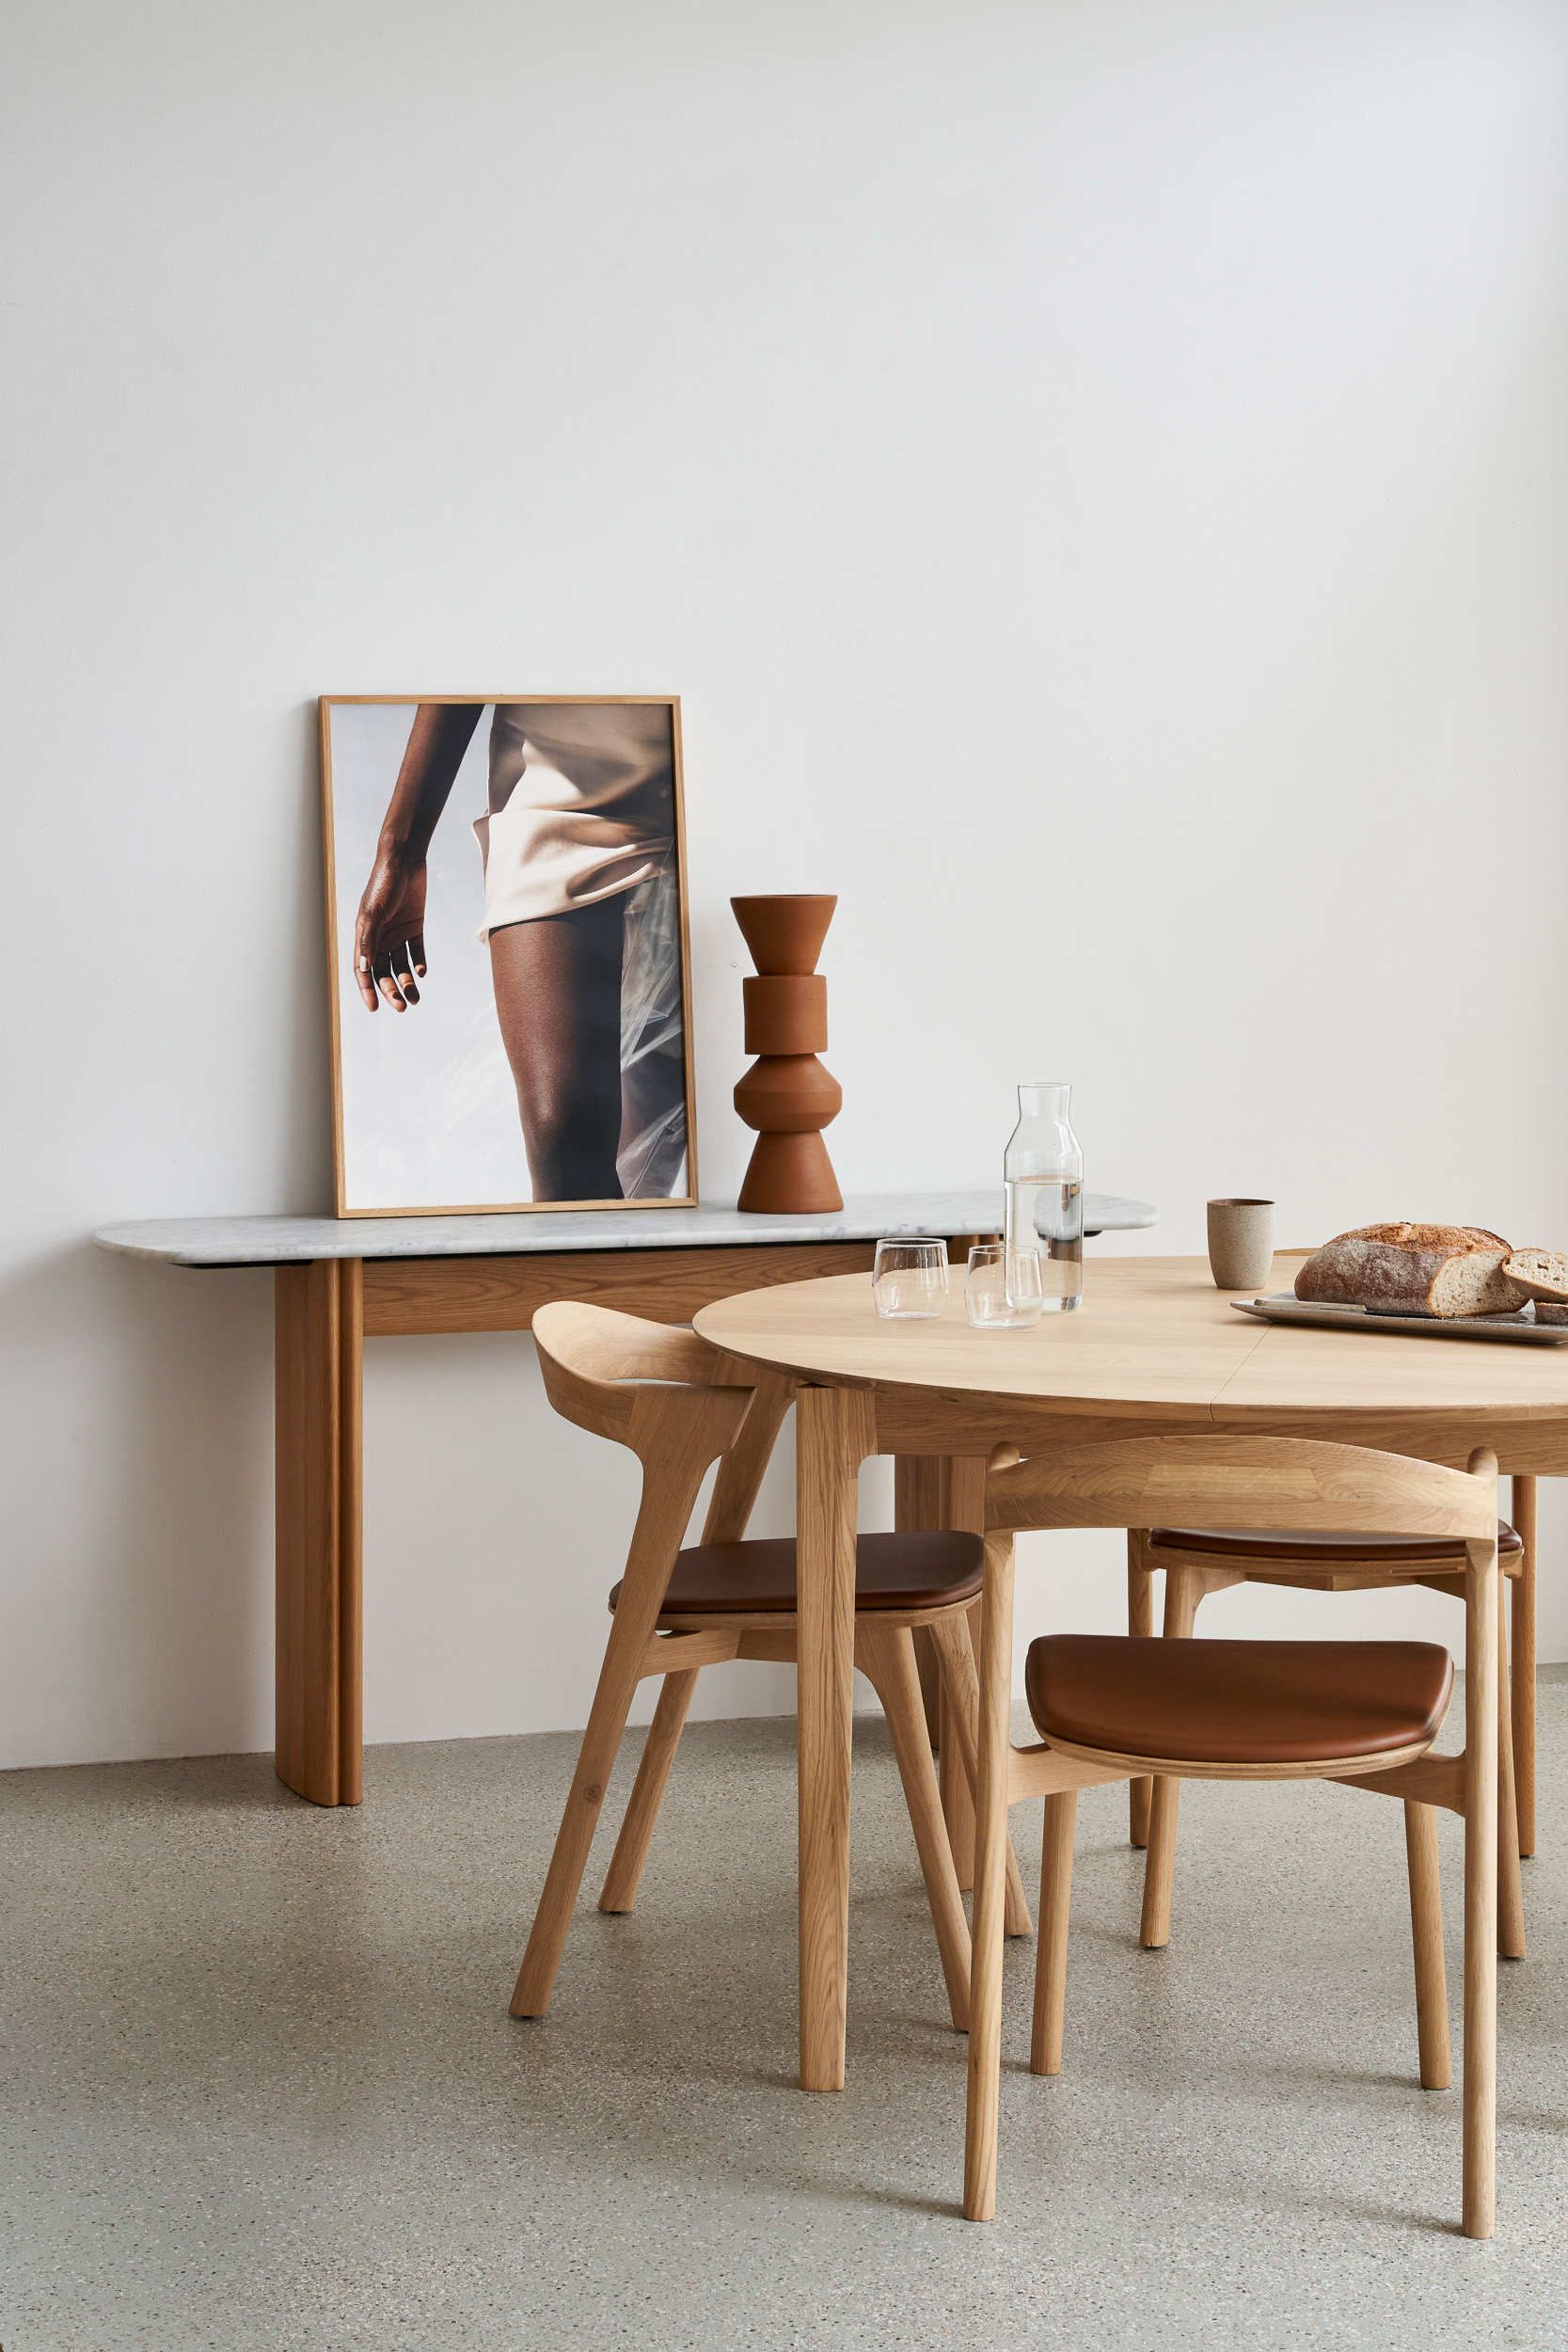 Ethnicraft Oak Bok Round Extendable Dining Table